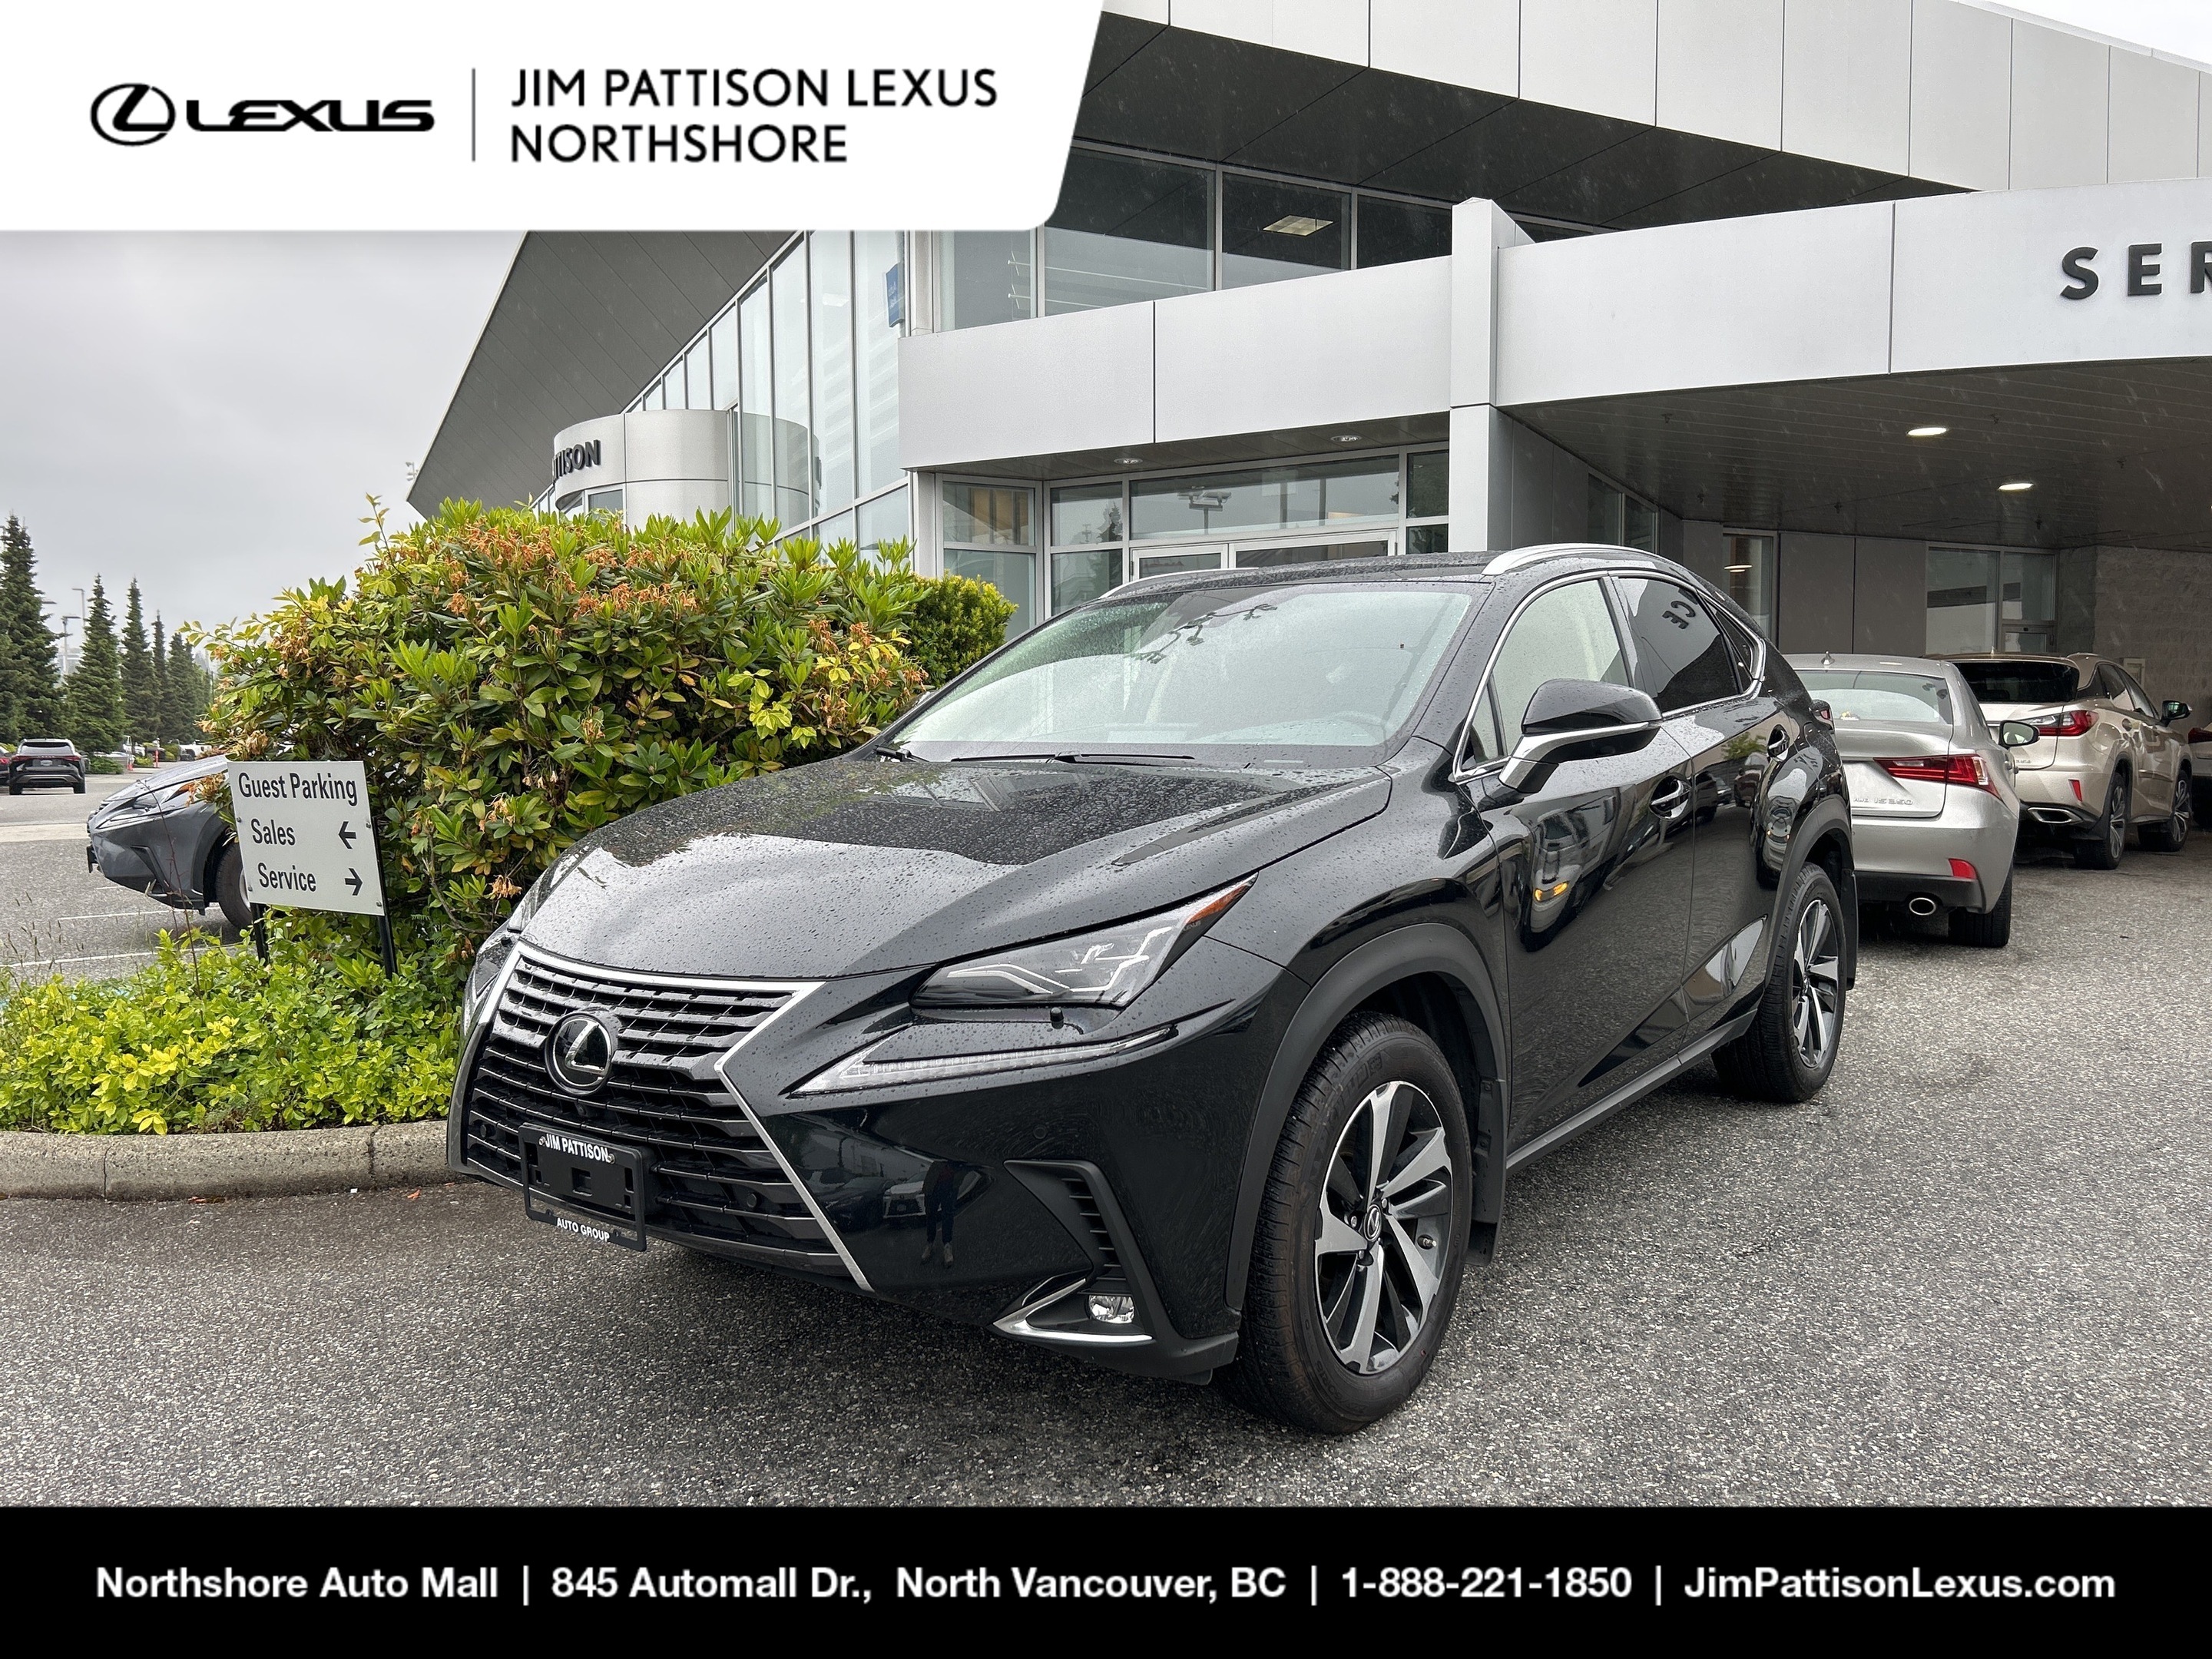 2021 Lexus NX 300 AWD / EXECUTIVE PKG, NO ACCIDENTS, ONE OWNER